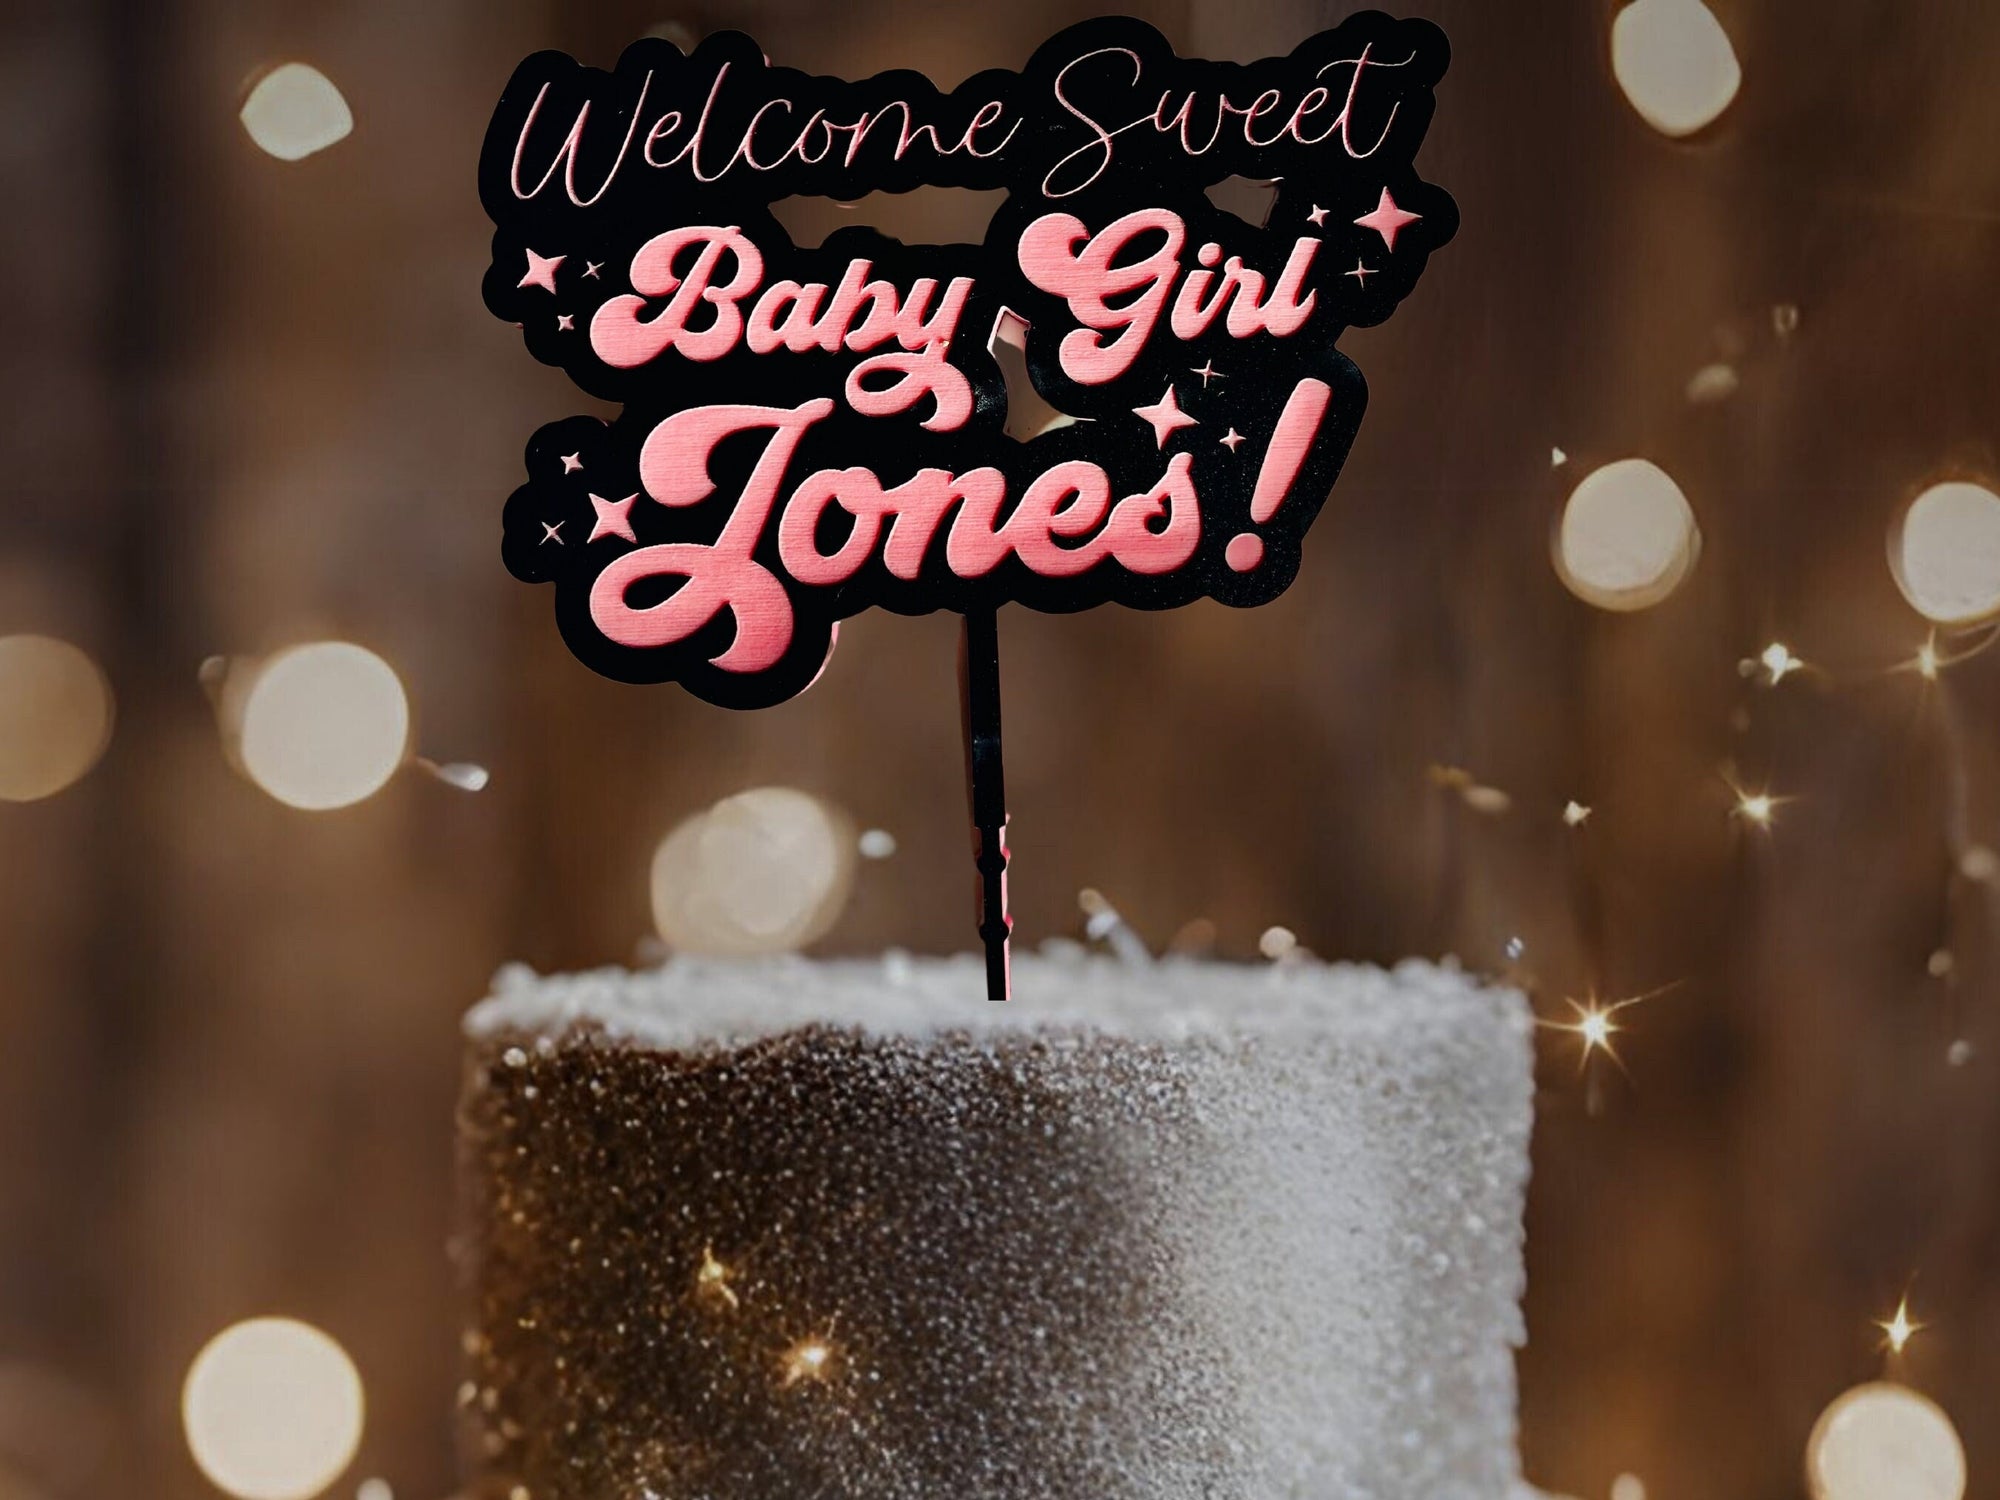 Personalized Baby Shower Cake Topper for Baby Shower Gift Gender Reveal Cake Topper Baby Name Cake Topper Premium Acrylic Cake Topper